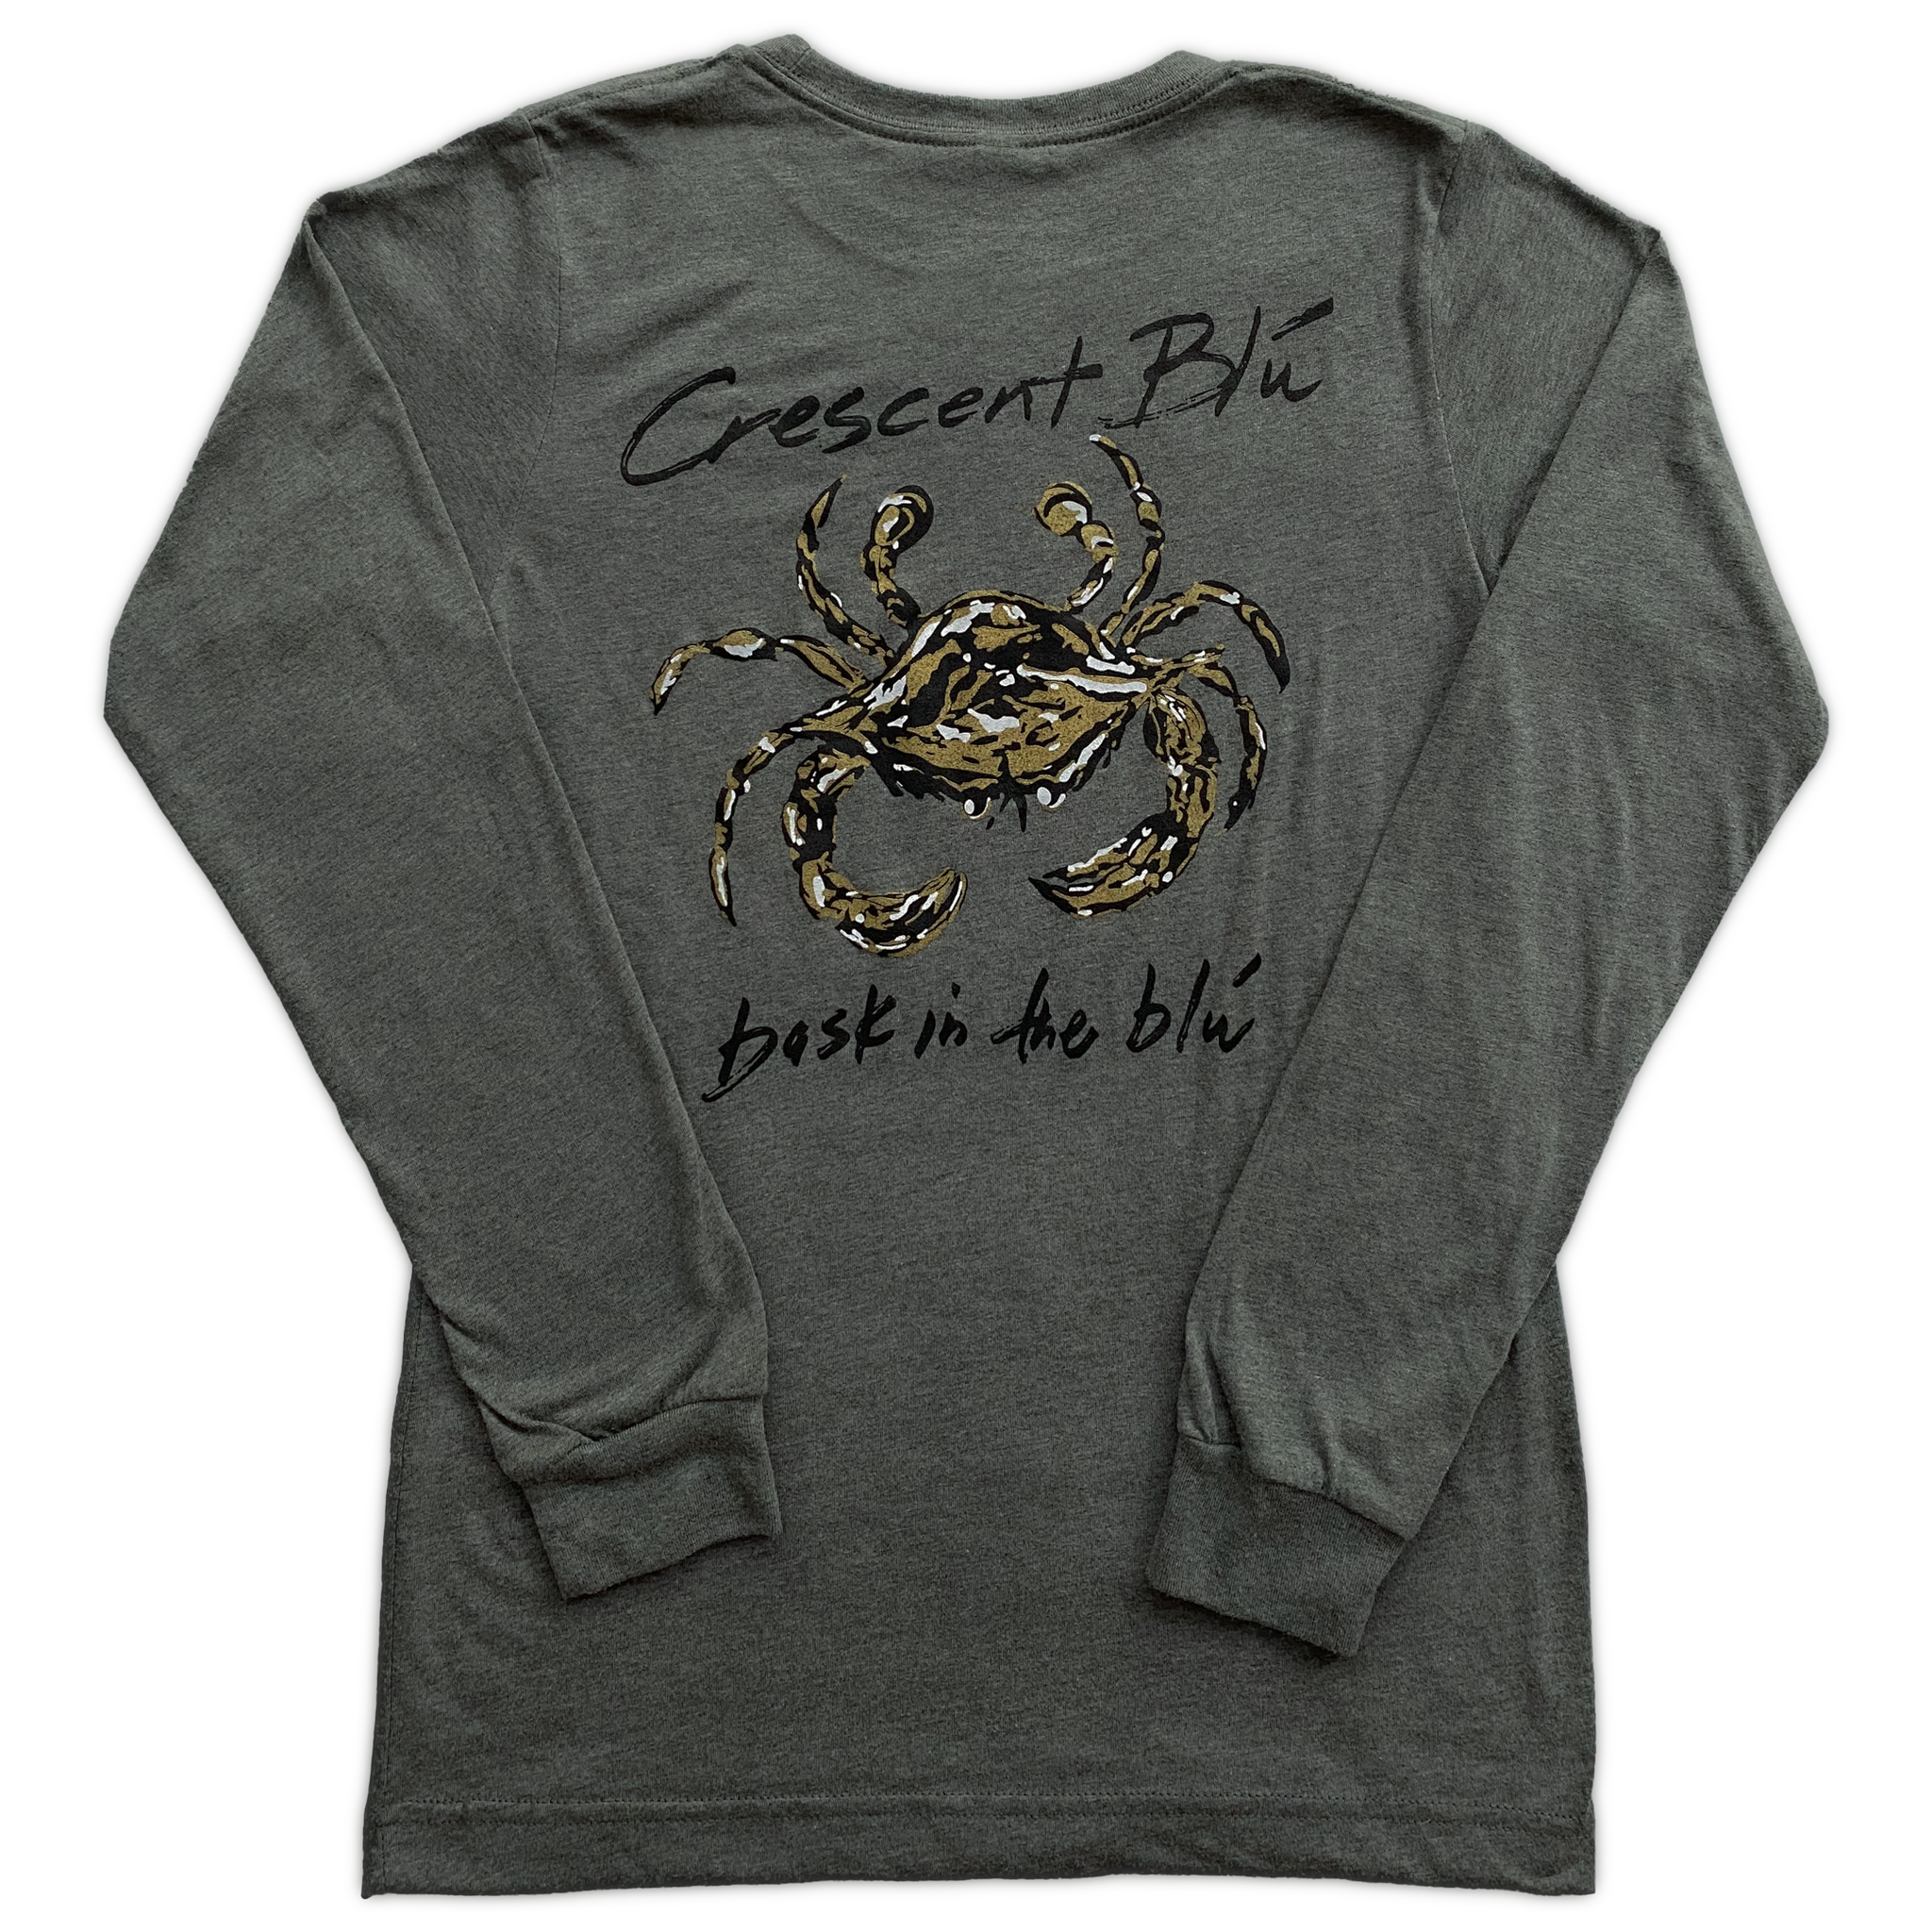 A black, gold, and white crab centered on the back of a long sleeve heather gray t-shirt. In black above the crab is Crescent Blu, below the crab in black is bask in the blu. 